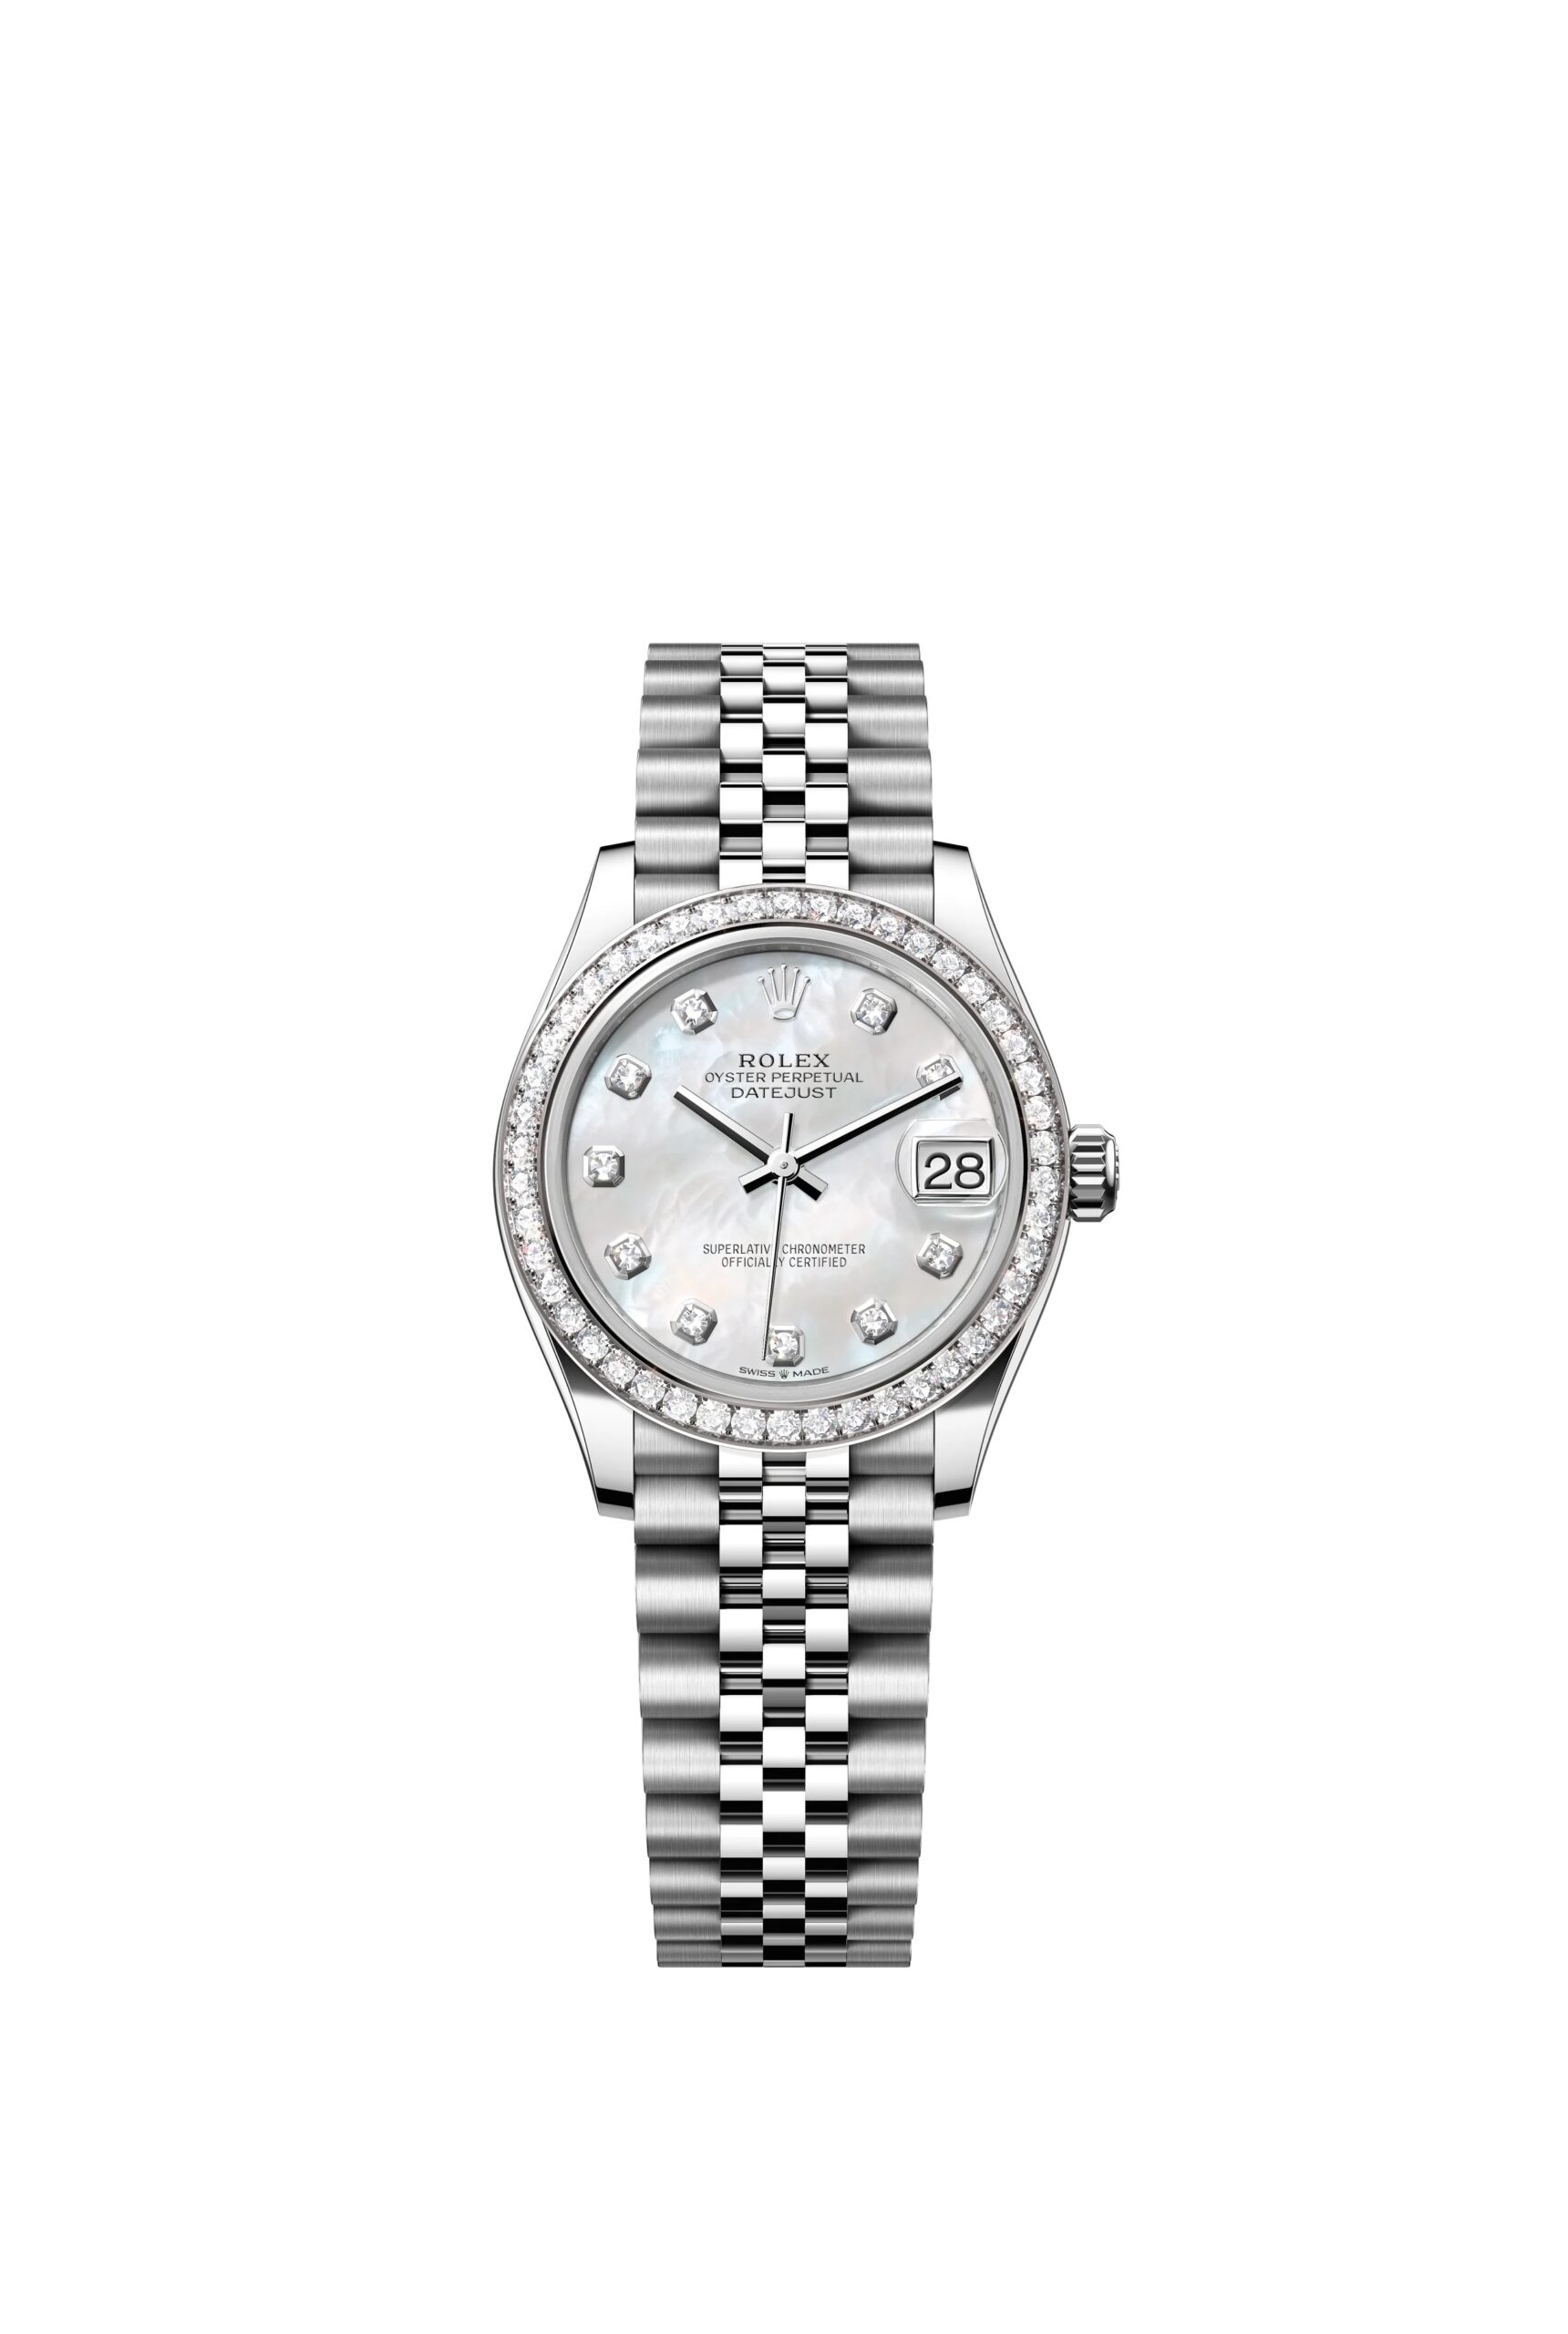 Rolex Datejust 31 Oyster, 31 mm, Oystersteel, white gold and diamonds Reference 278384RBR